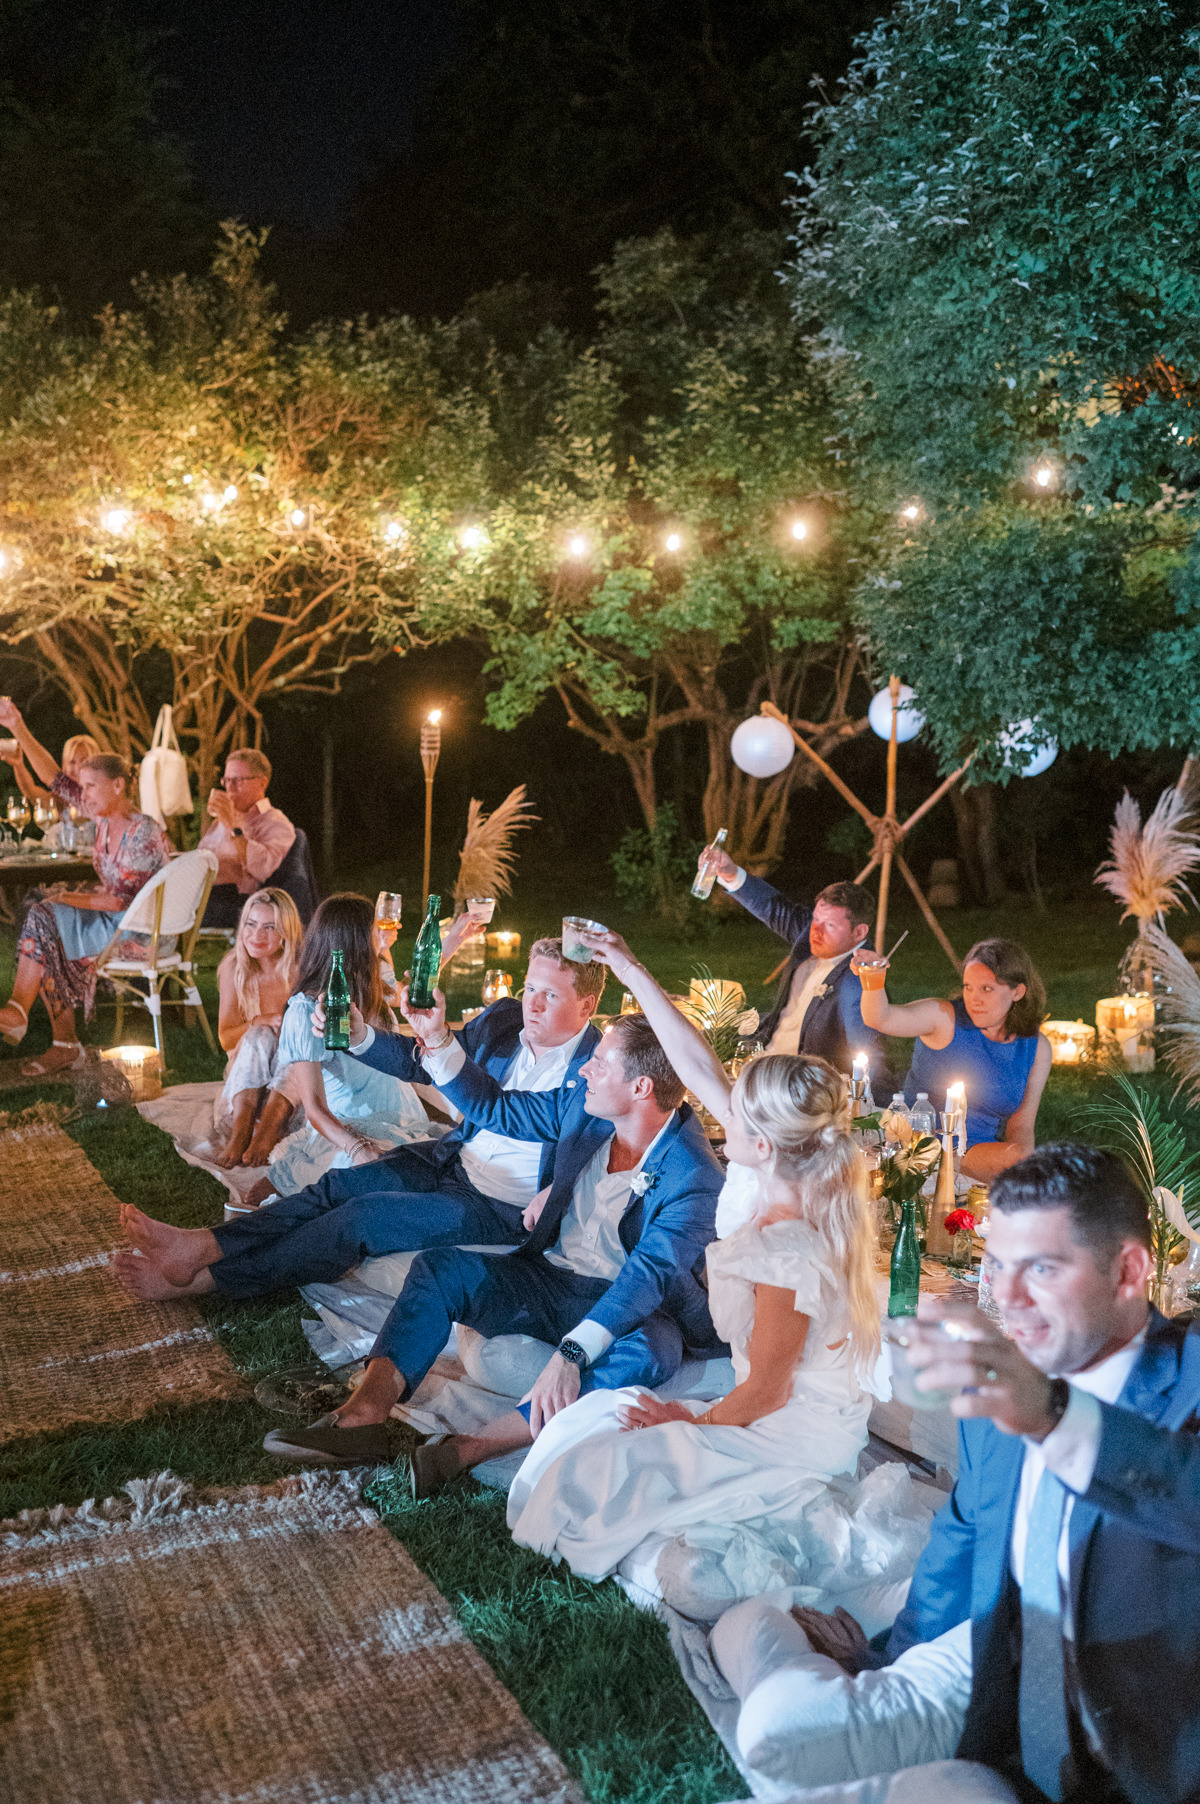 Guests and wedding party seated on pillows raising a glass to toast